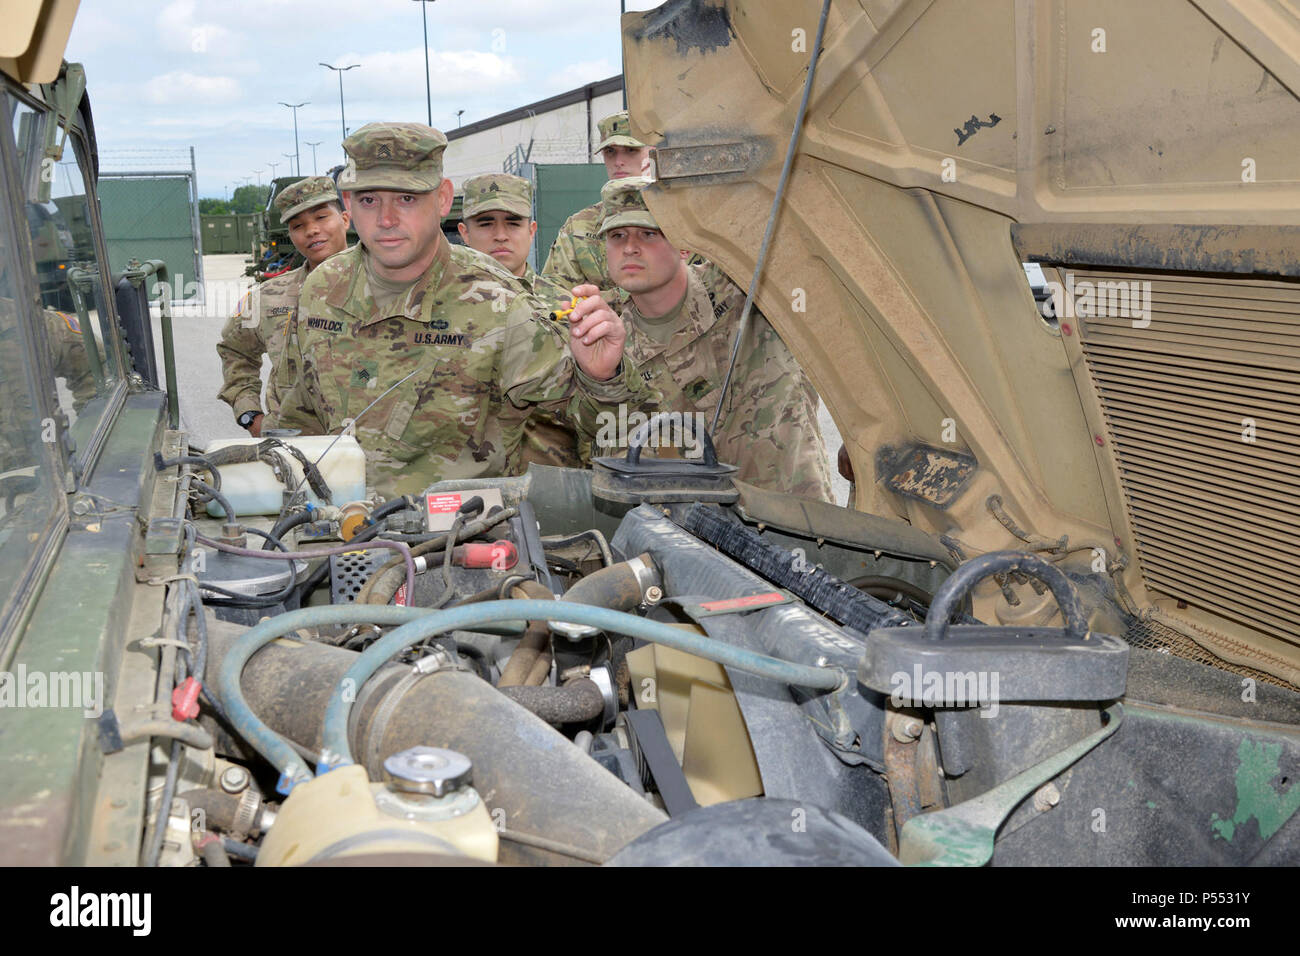 U.S. Army Paratroopers assigned to the 173rd Airborne Brigade Support Battalion, 173rd Airborne Brigade, are tested on their procedures conducting Preventive Maintenance Checks and Service of military vehicles during the Junior Leader Challenge at Caserma Del Din, Vicenza, Italy May 10, 2017.  The 173rd Airborne Brigade is the U.S. Army Contingency Response Force in Europe, capable of projecting ready forces anywhere in the U.S. European, Africa or Central Commands areas of responsibility within 18 hours. Stock Photo